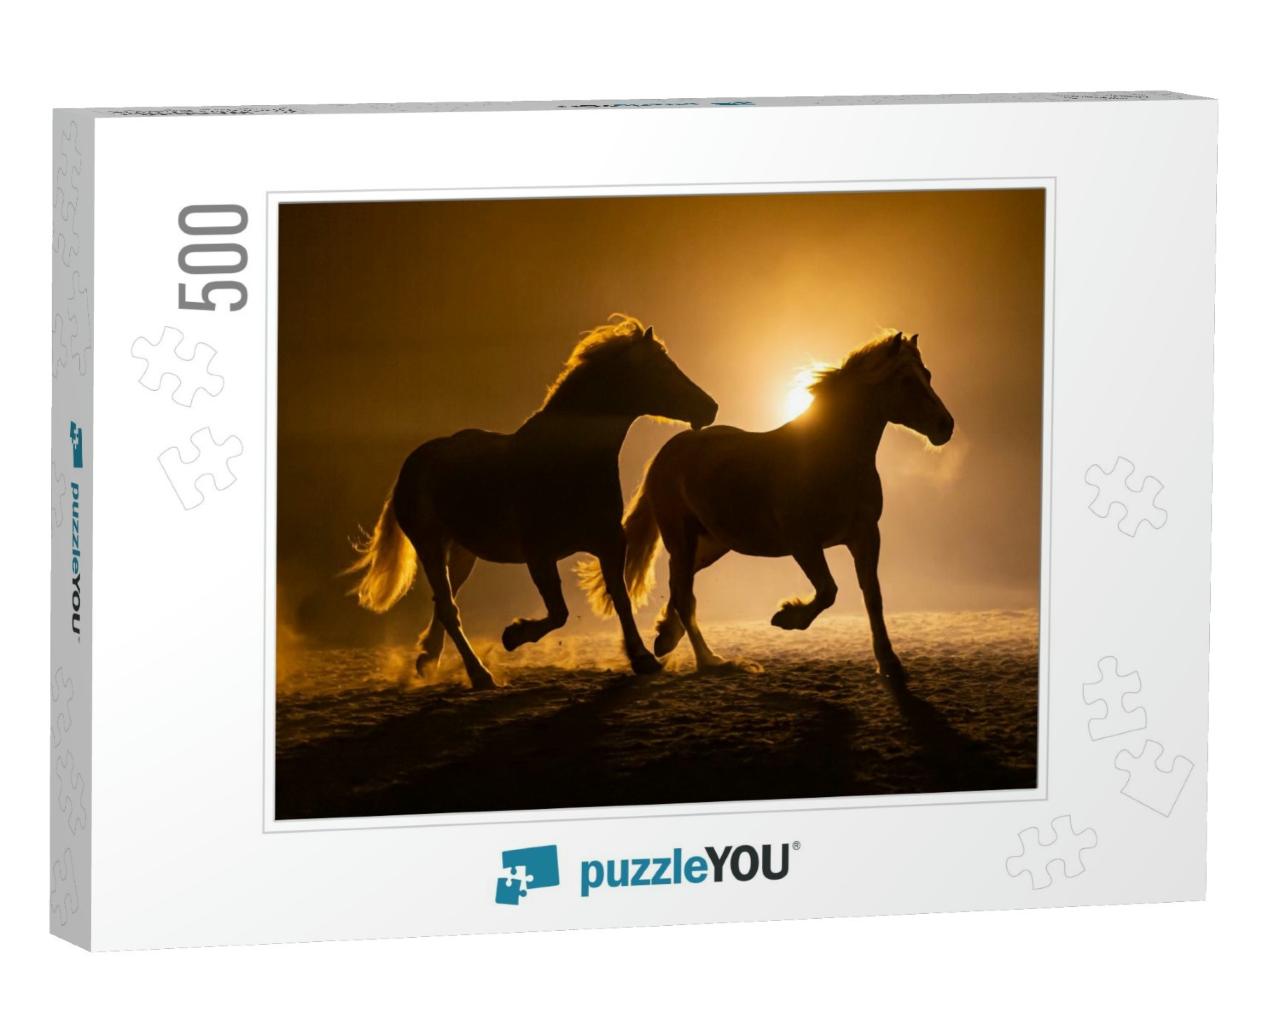 Silhouette of Two Galloping Haflinger Horses in a Orange... Jigsaw Puzzle with 500 pieces